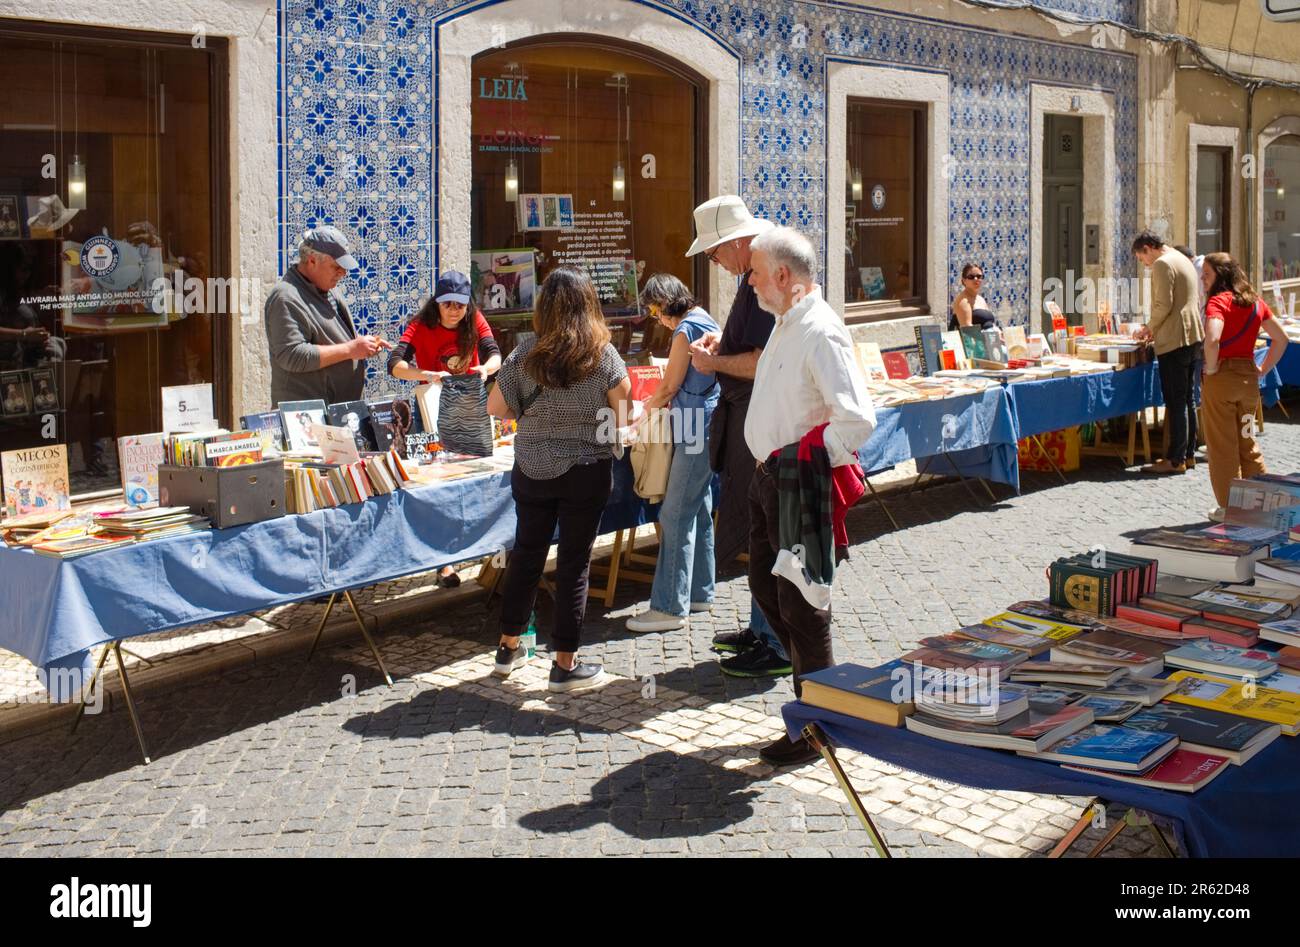 Open air market stalls selling books Stock Photo